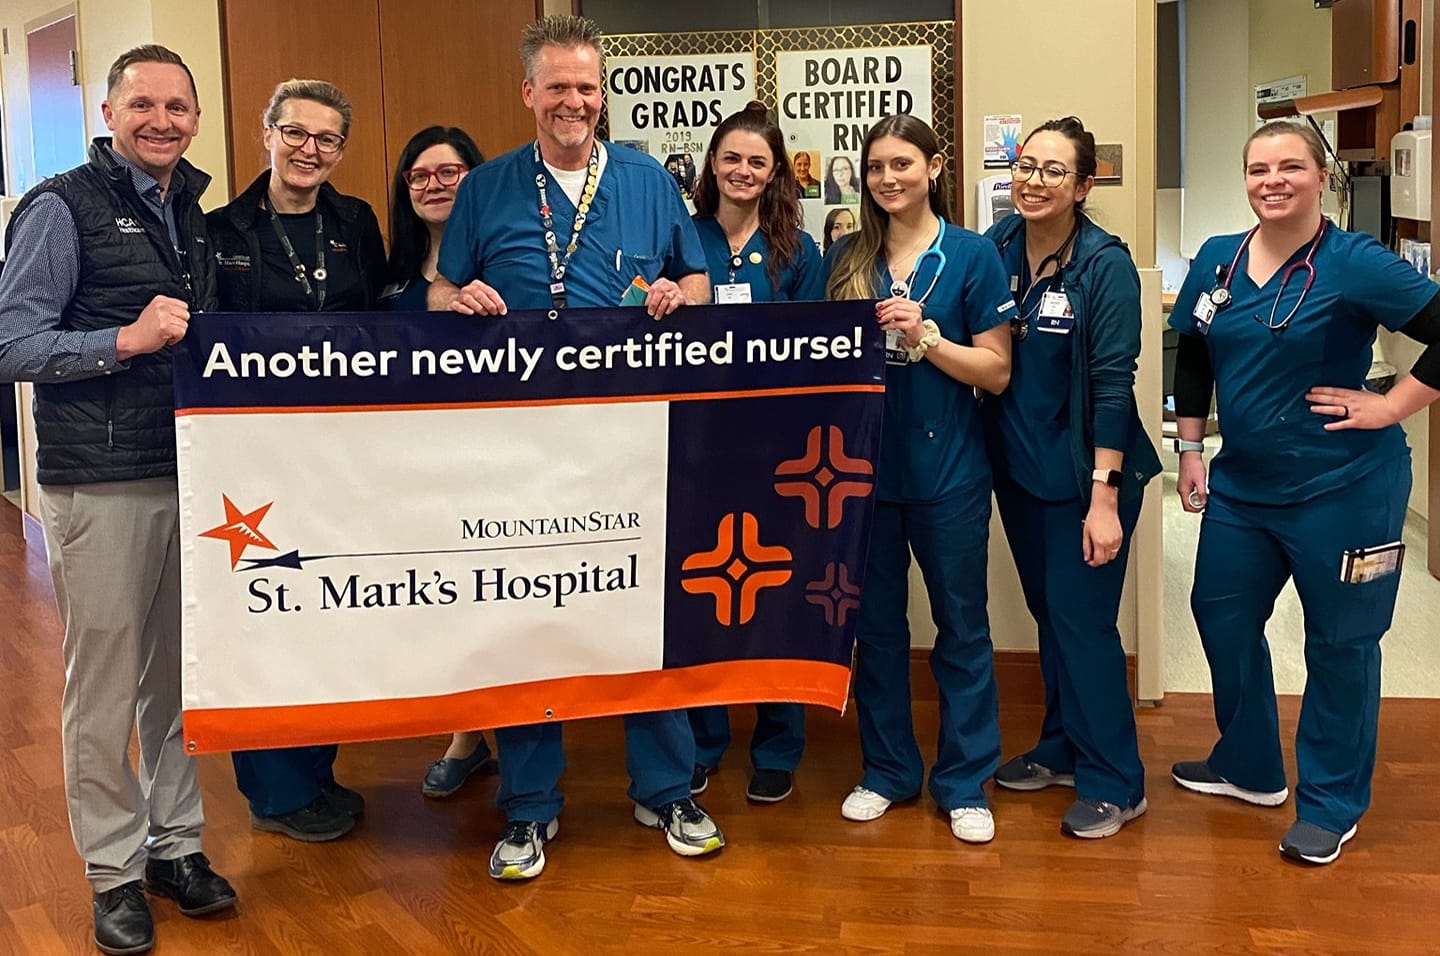 A group of nurses at St. Mark's Hospital hold a sign celebrating a newly certified nurse